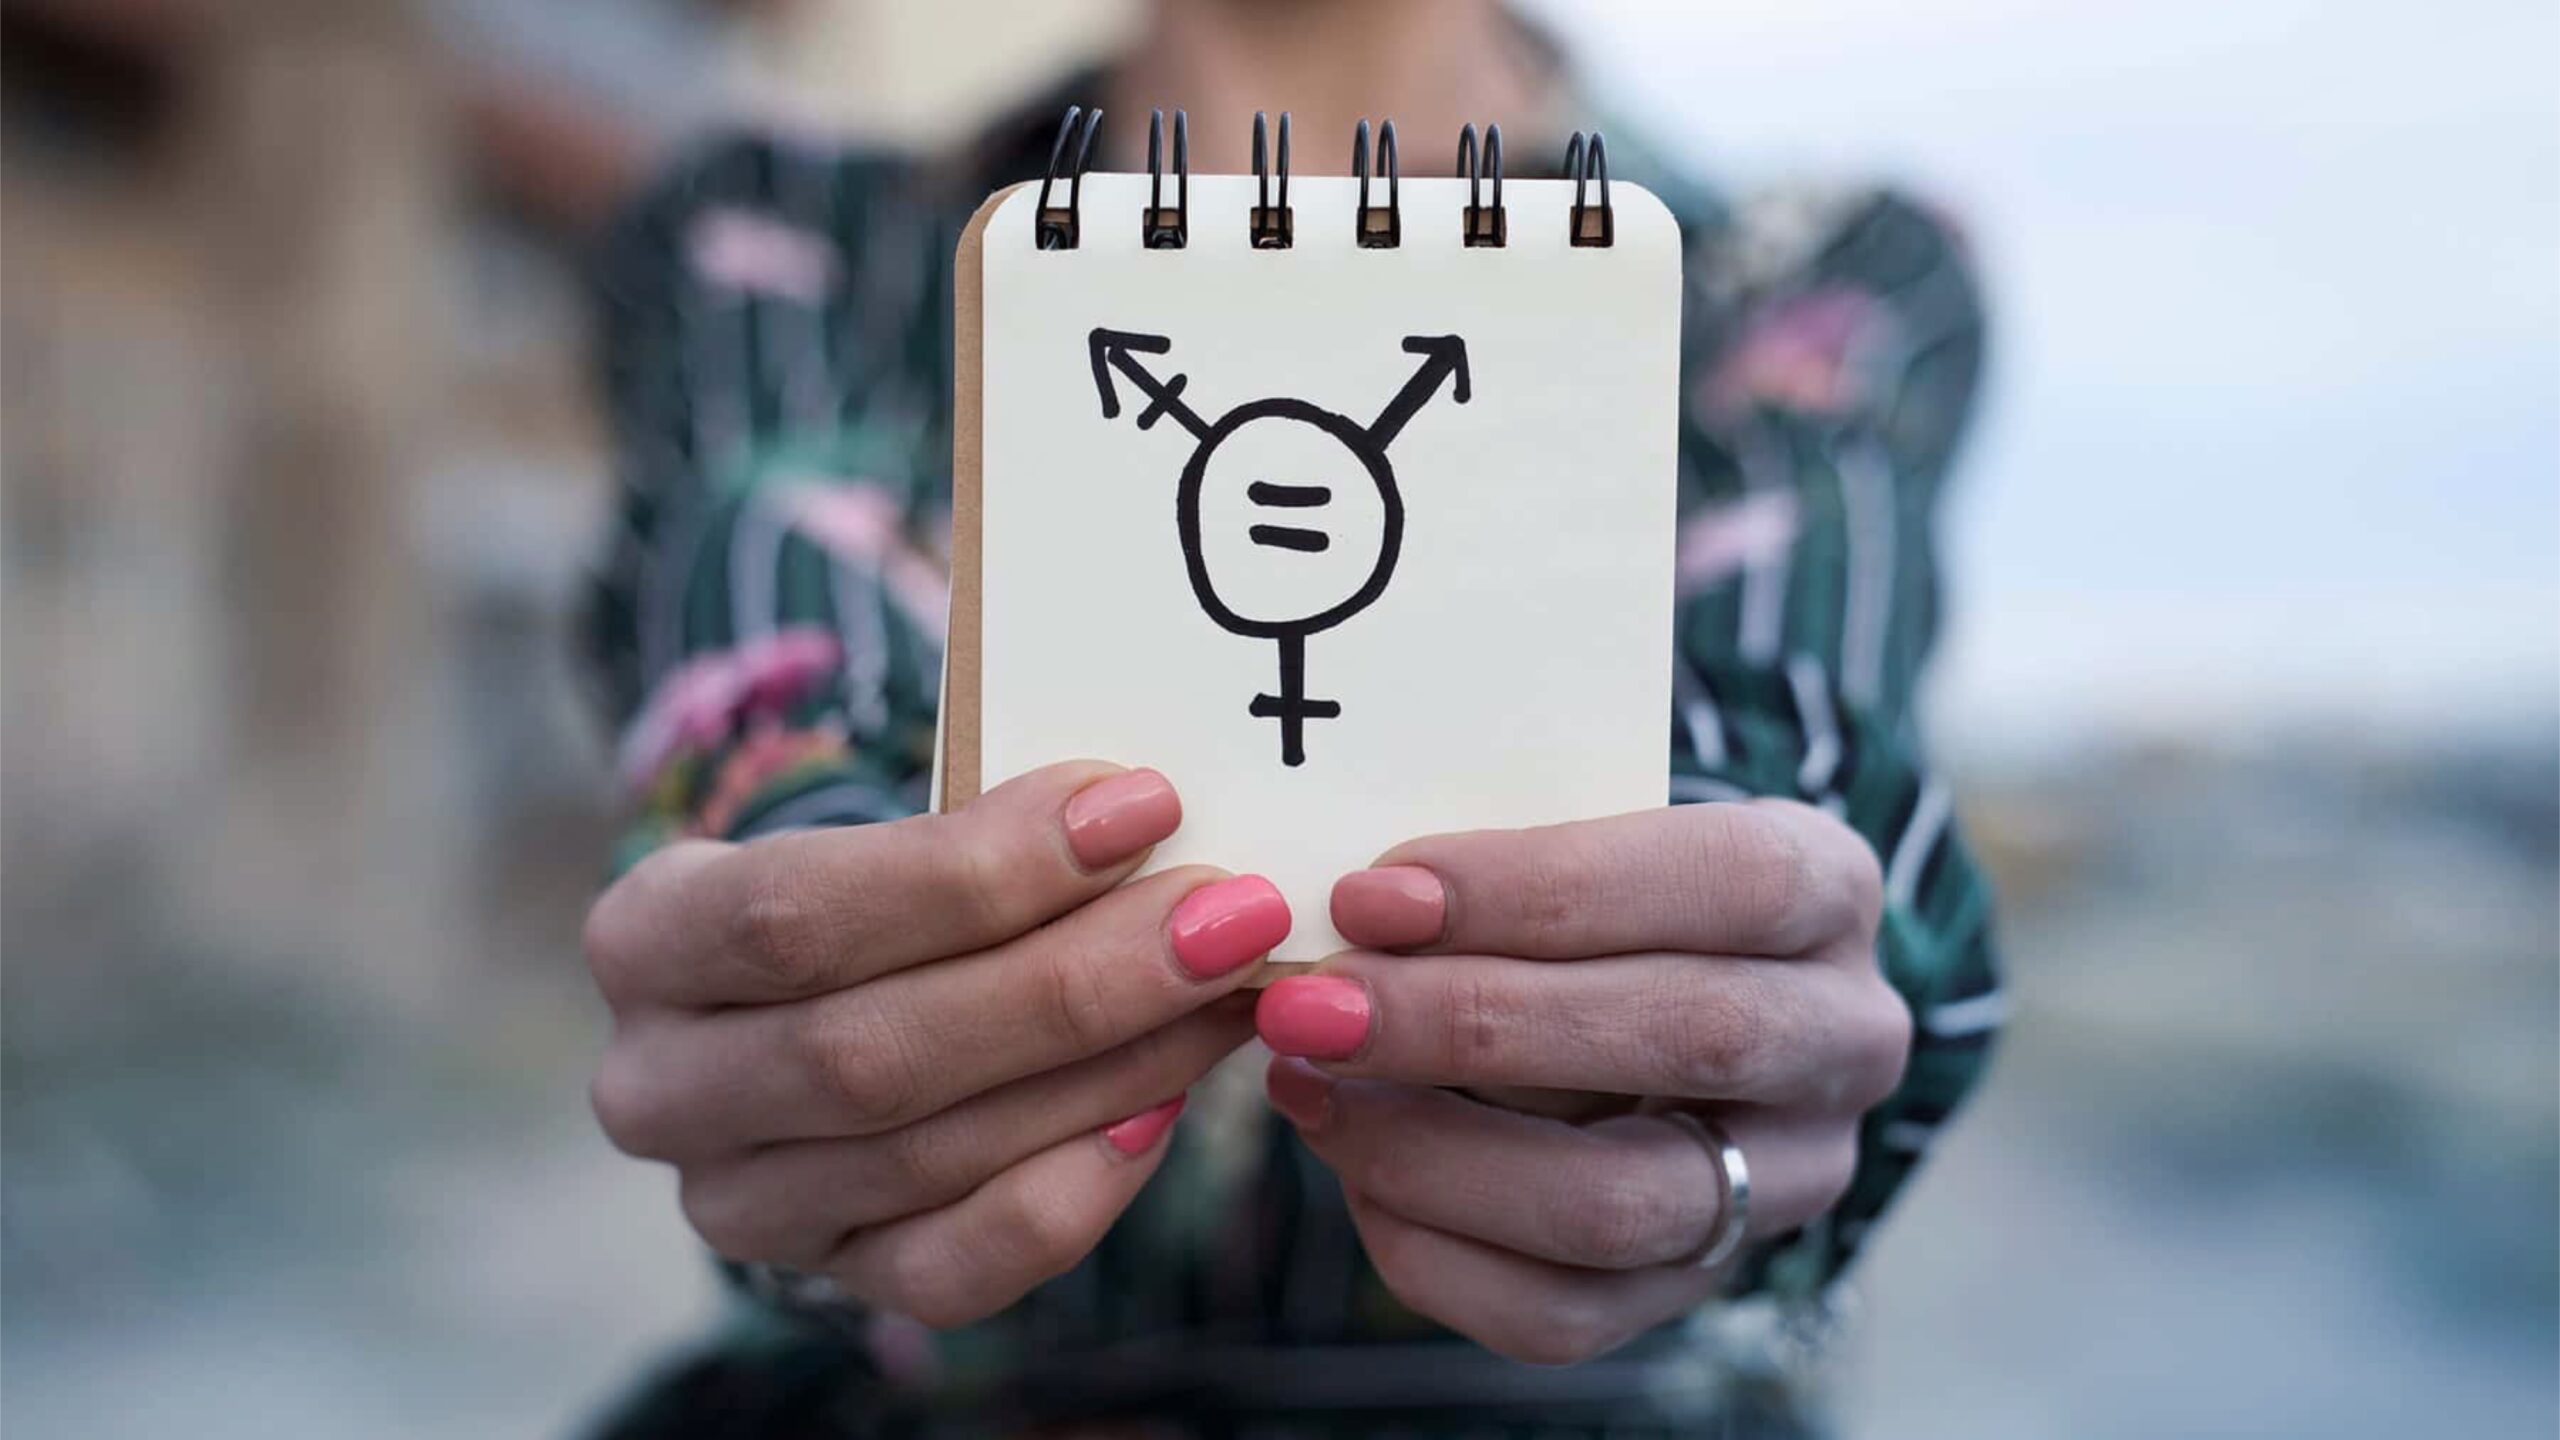 New Poll Shows Majority of Americans Oppose Transgender Ideology - Harbingers Daily